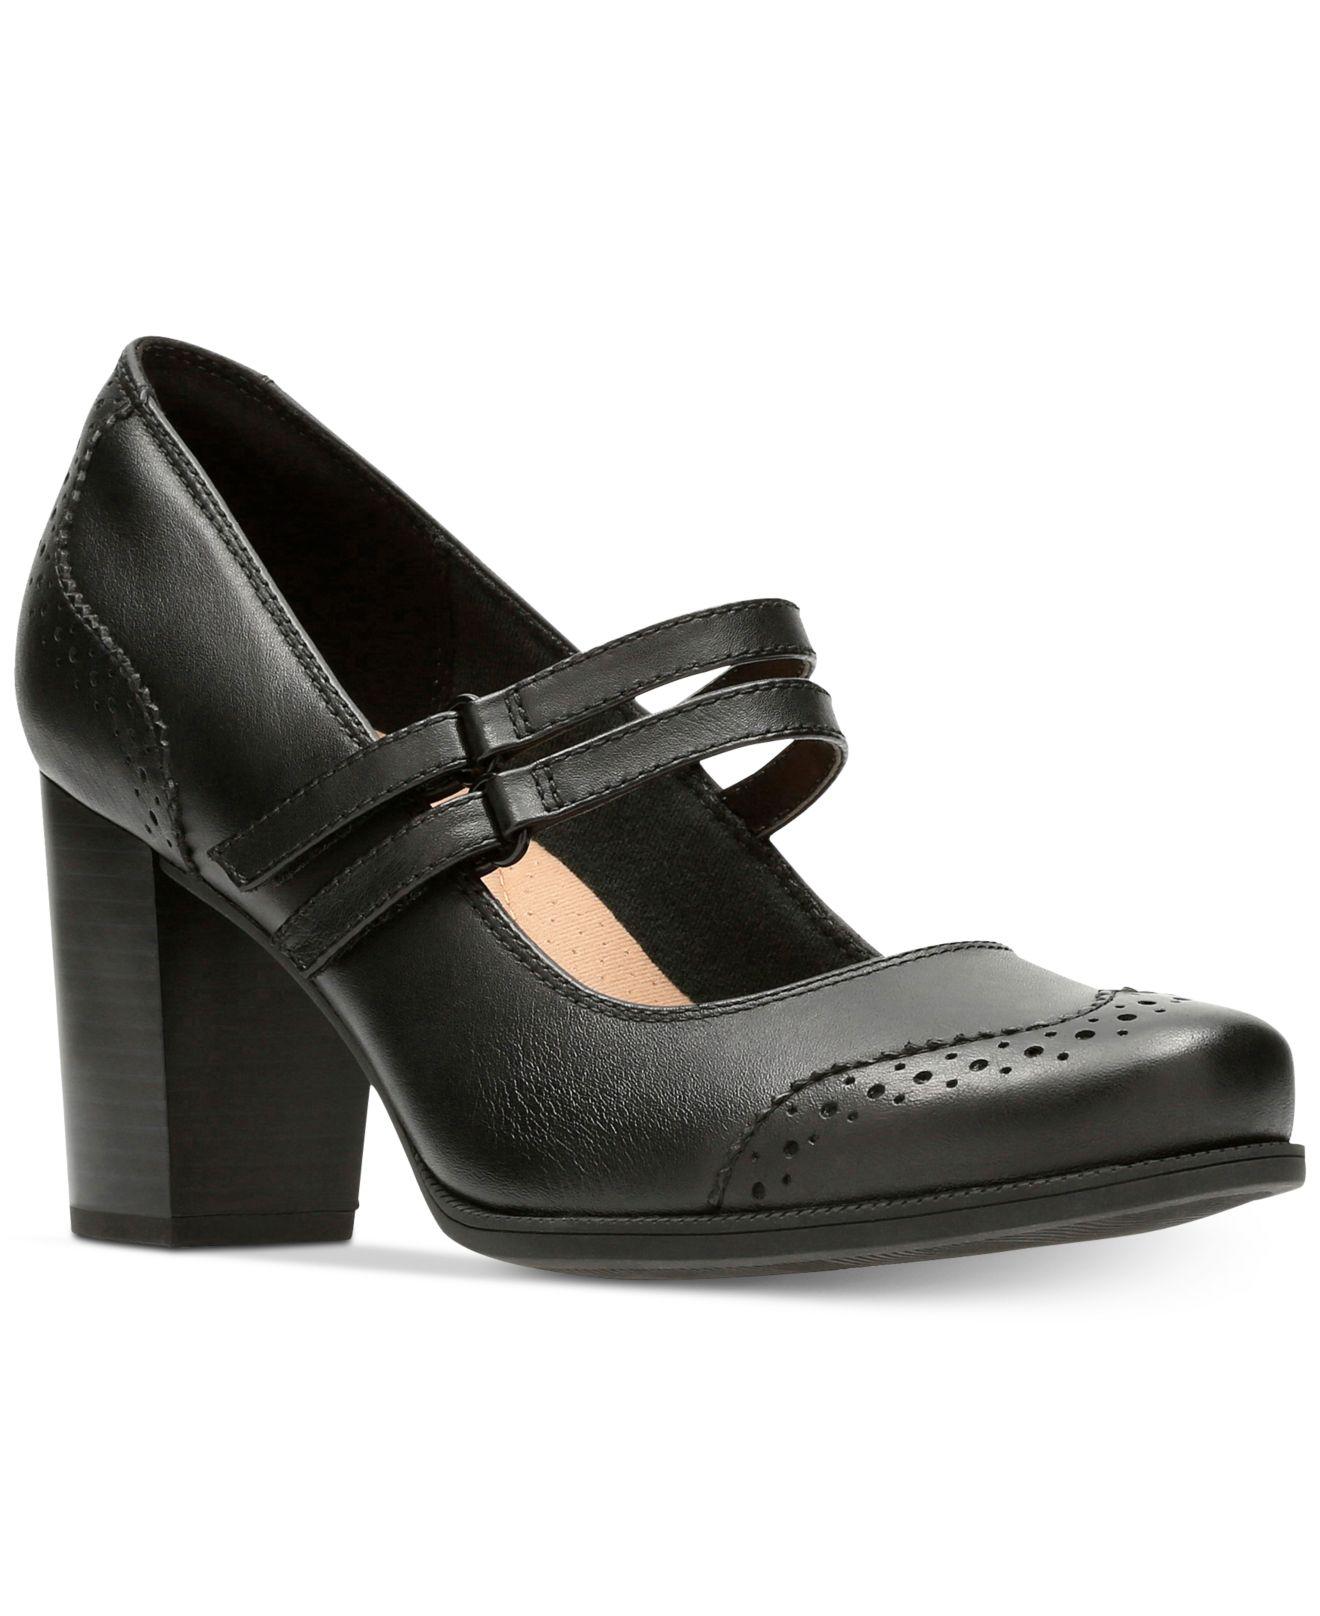 Clarks Claeson Tilly Mary Jane Pumps in Black | Lyst